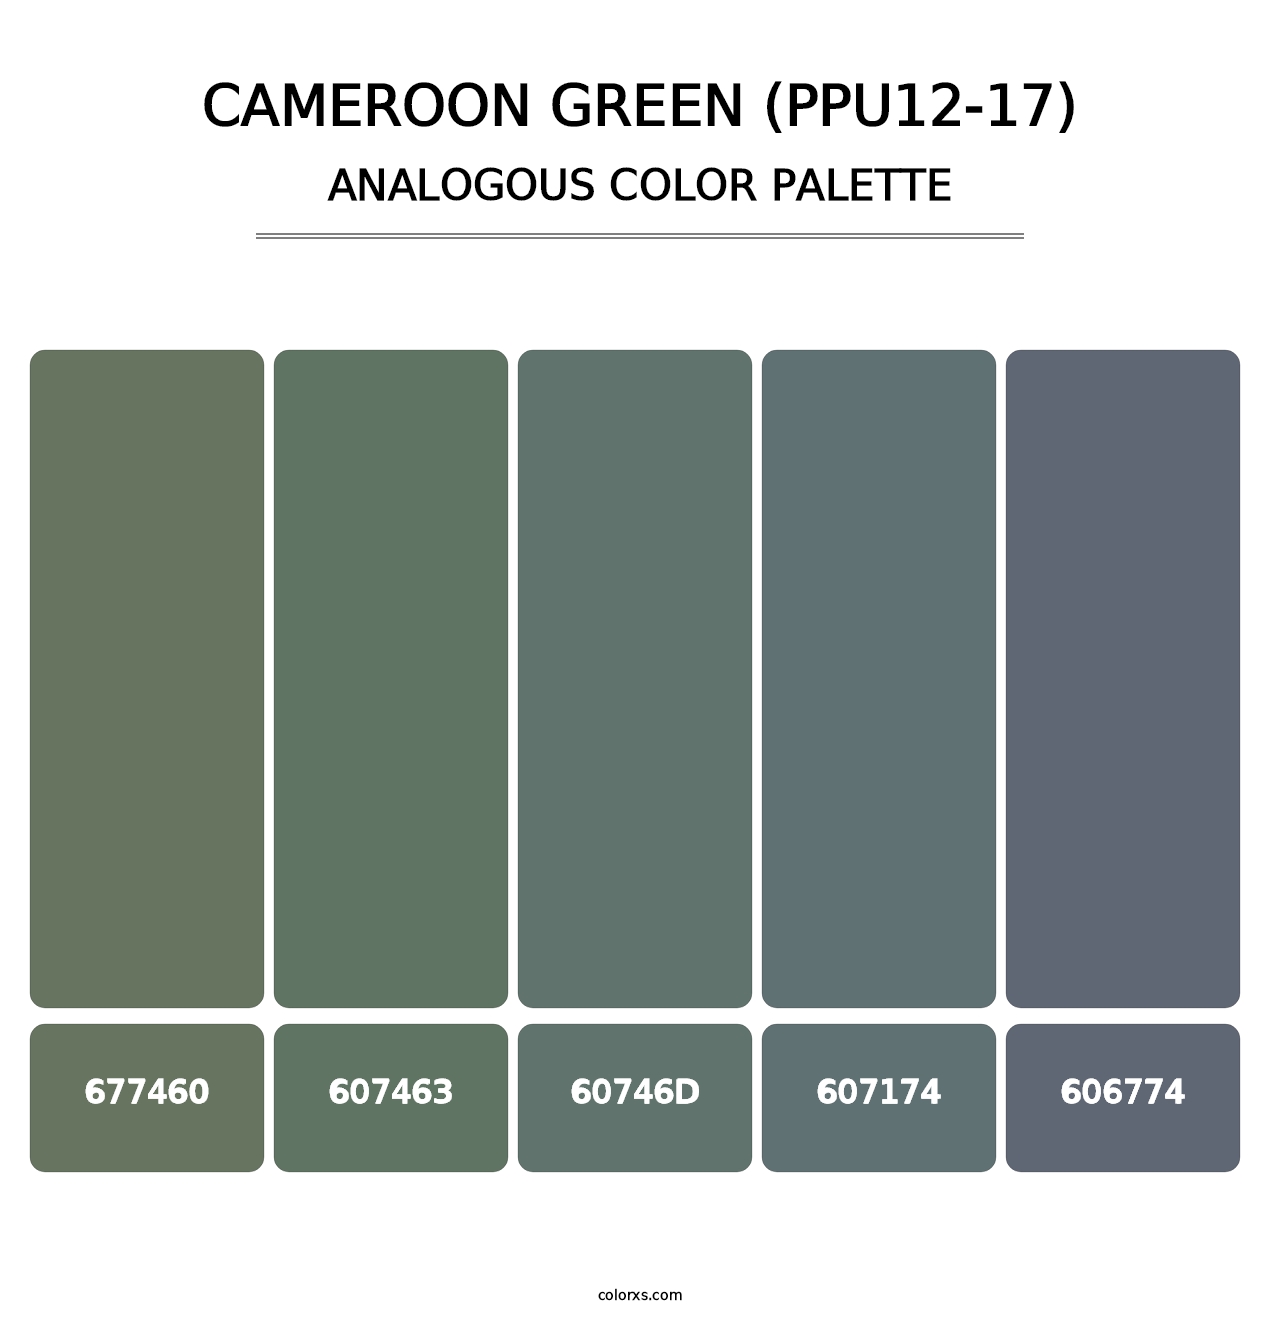 Cameroon Green (PPU12-17) - Analogous Color Palette